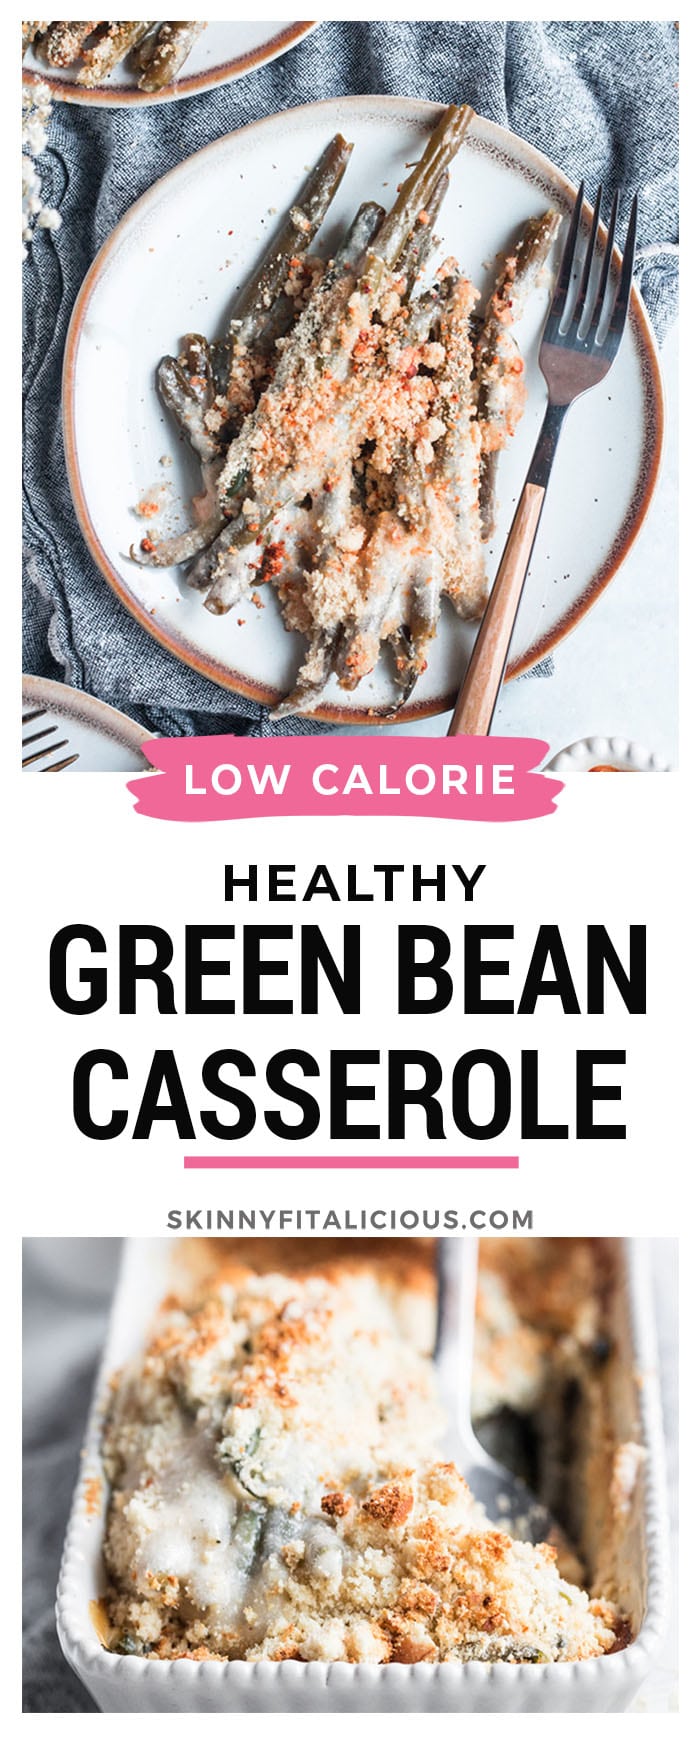 Healthy Green Bean Casserole made low calorie, gluten free and lower carb from scratch, without processed ingredients in under 30 minutes! 